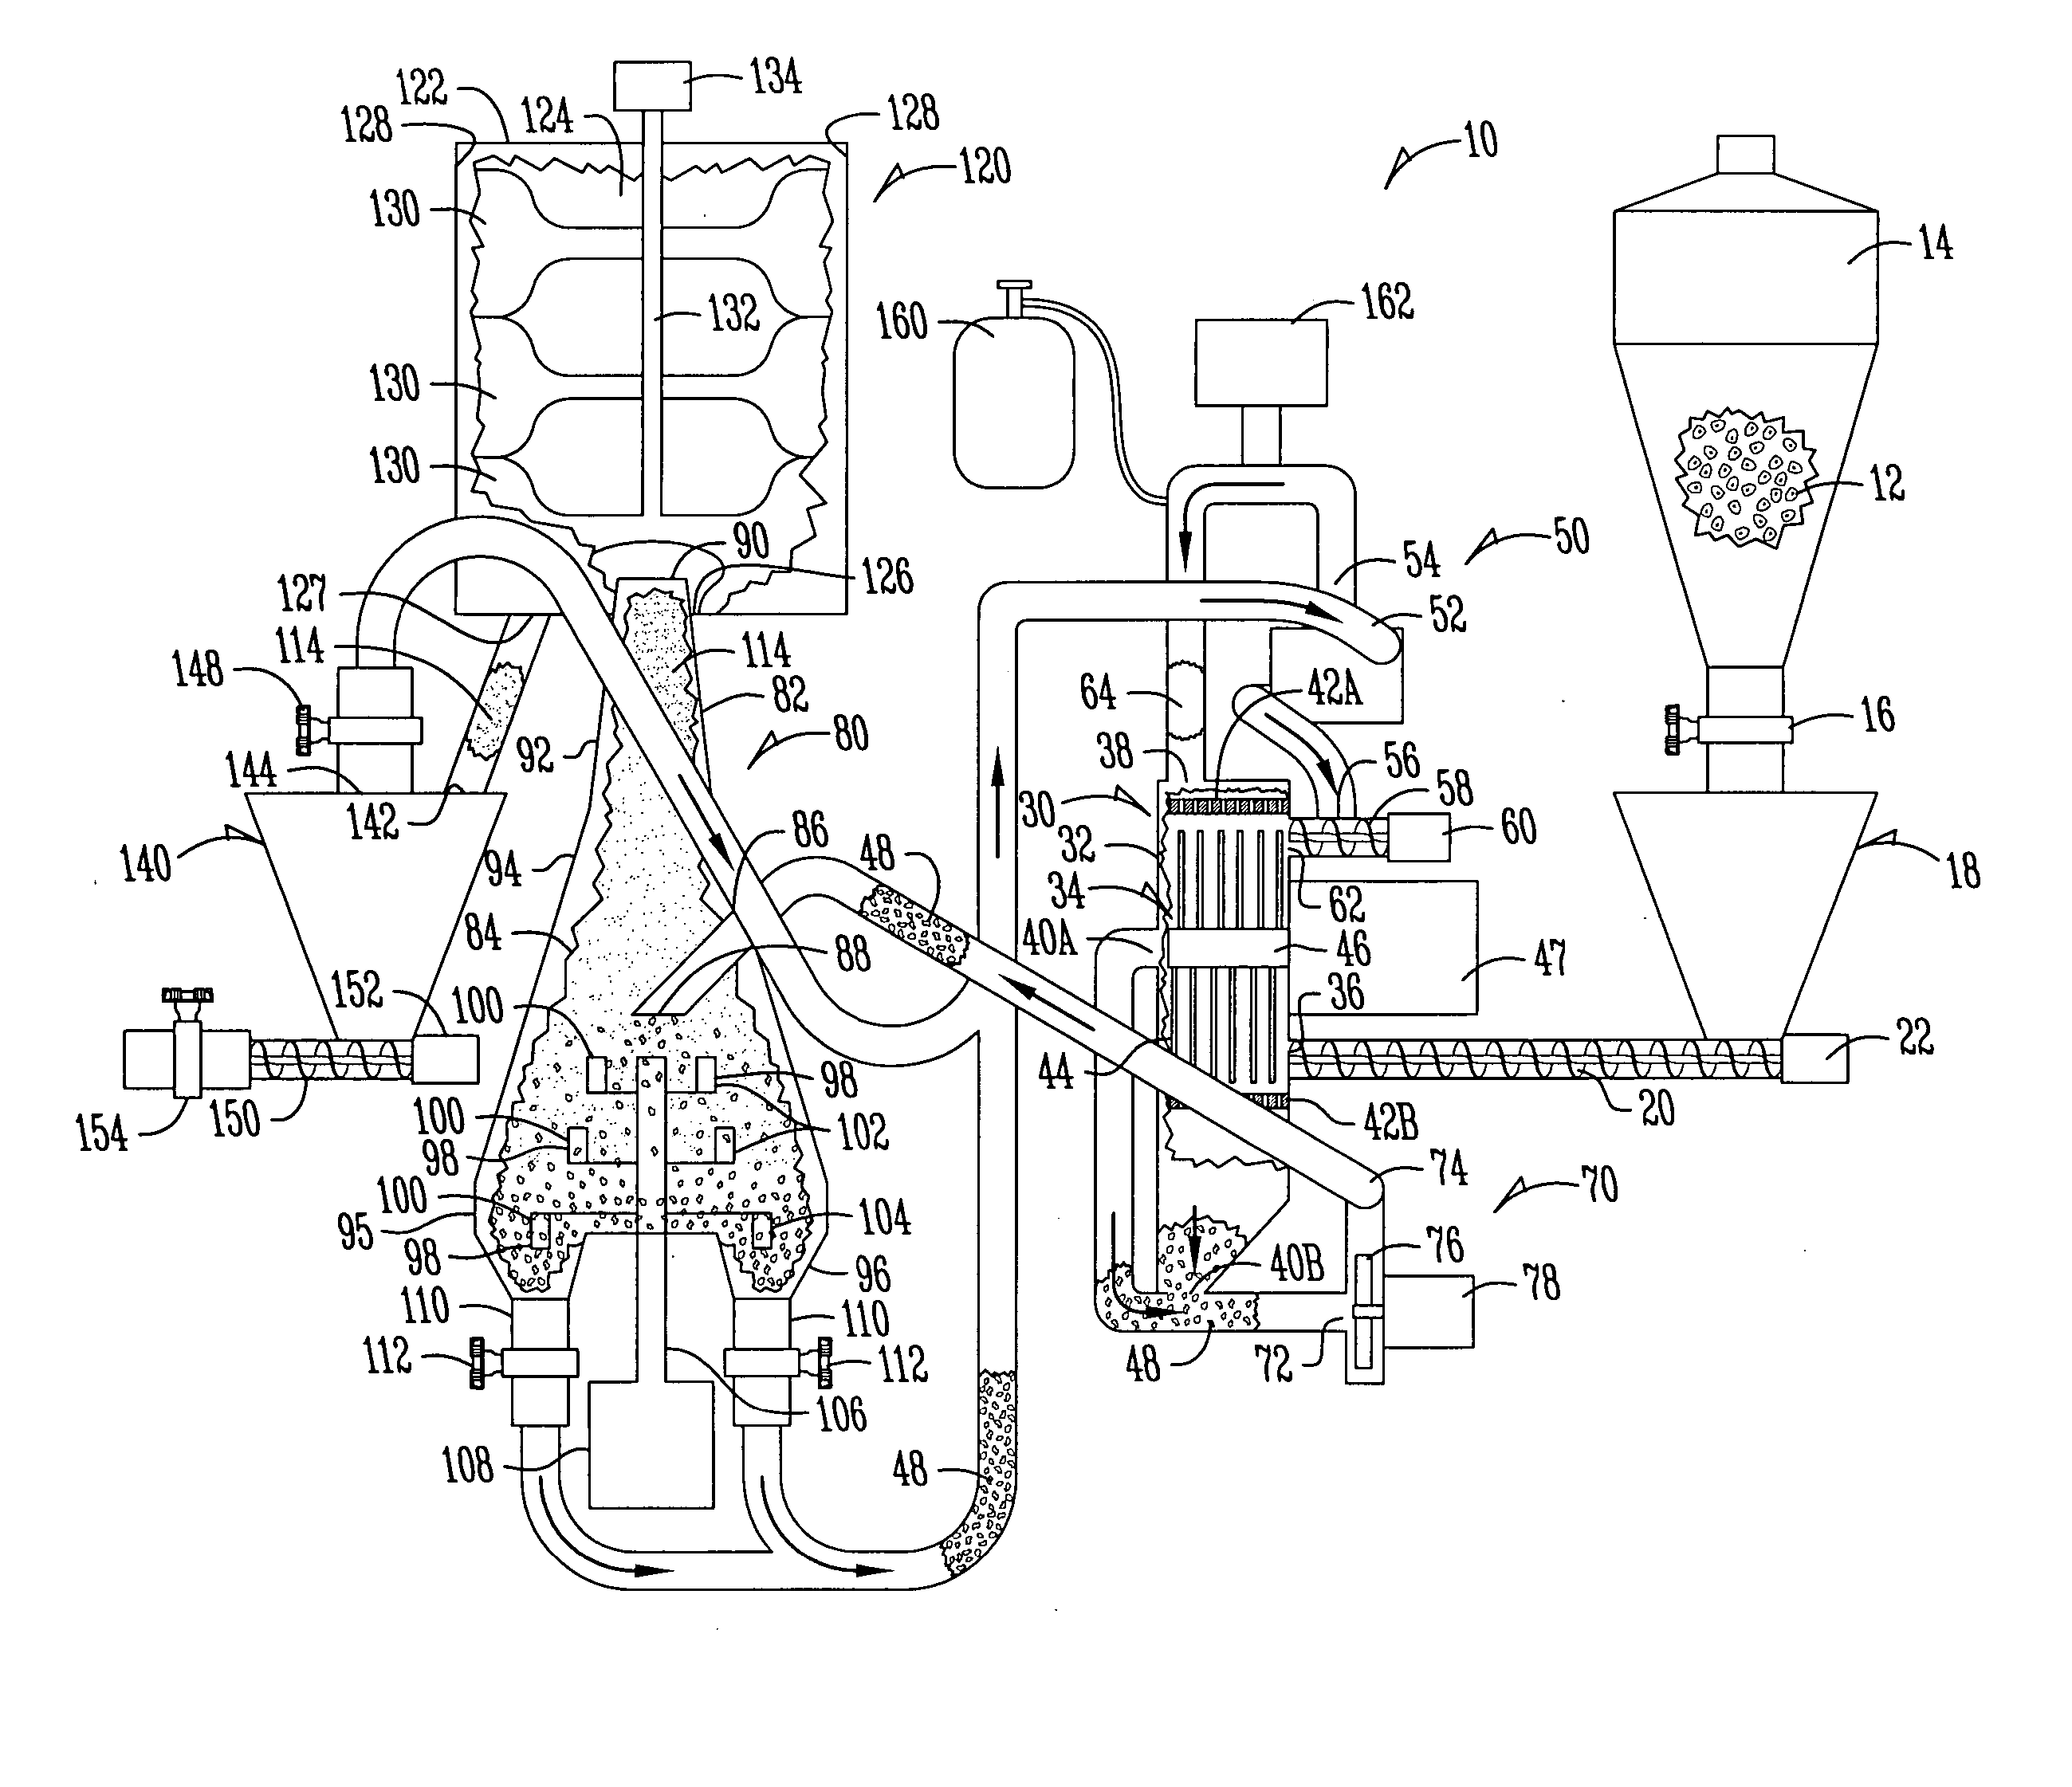 Granular material grinder and method of use